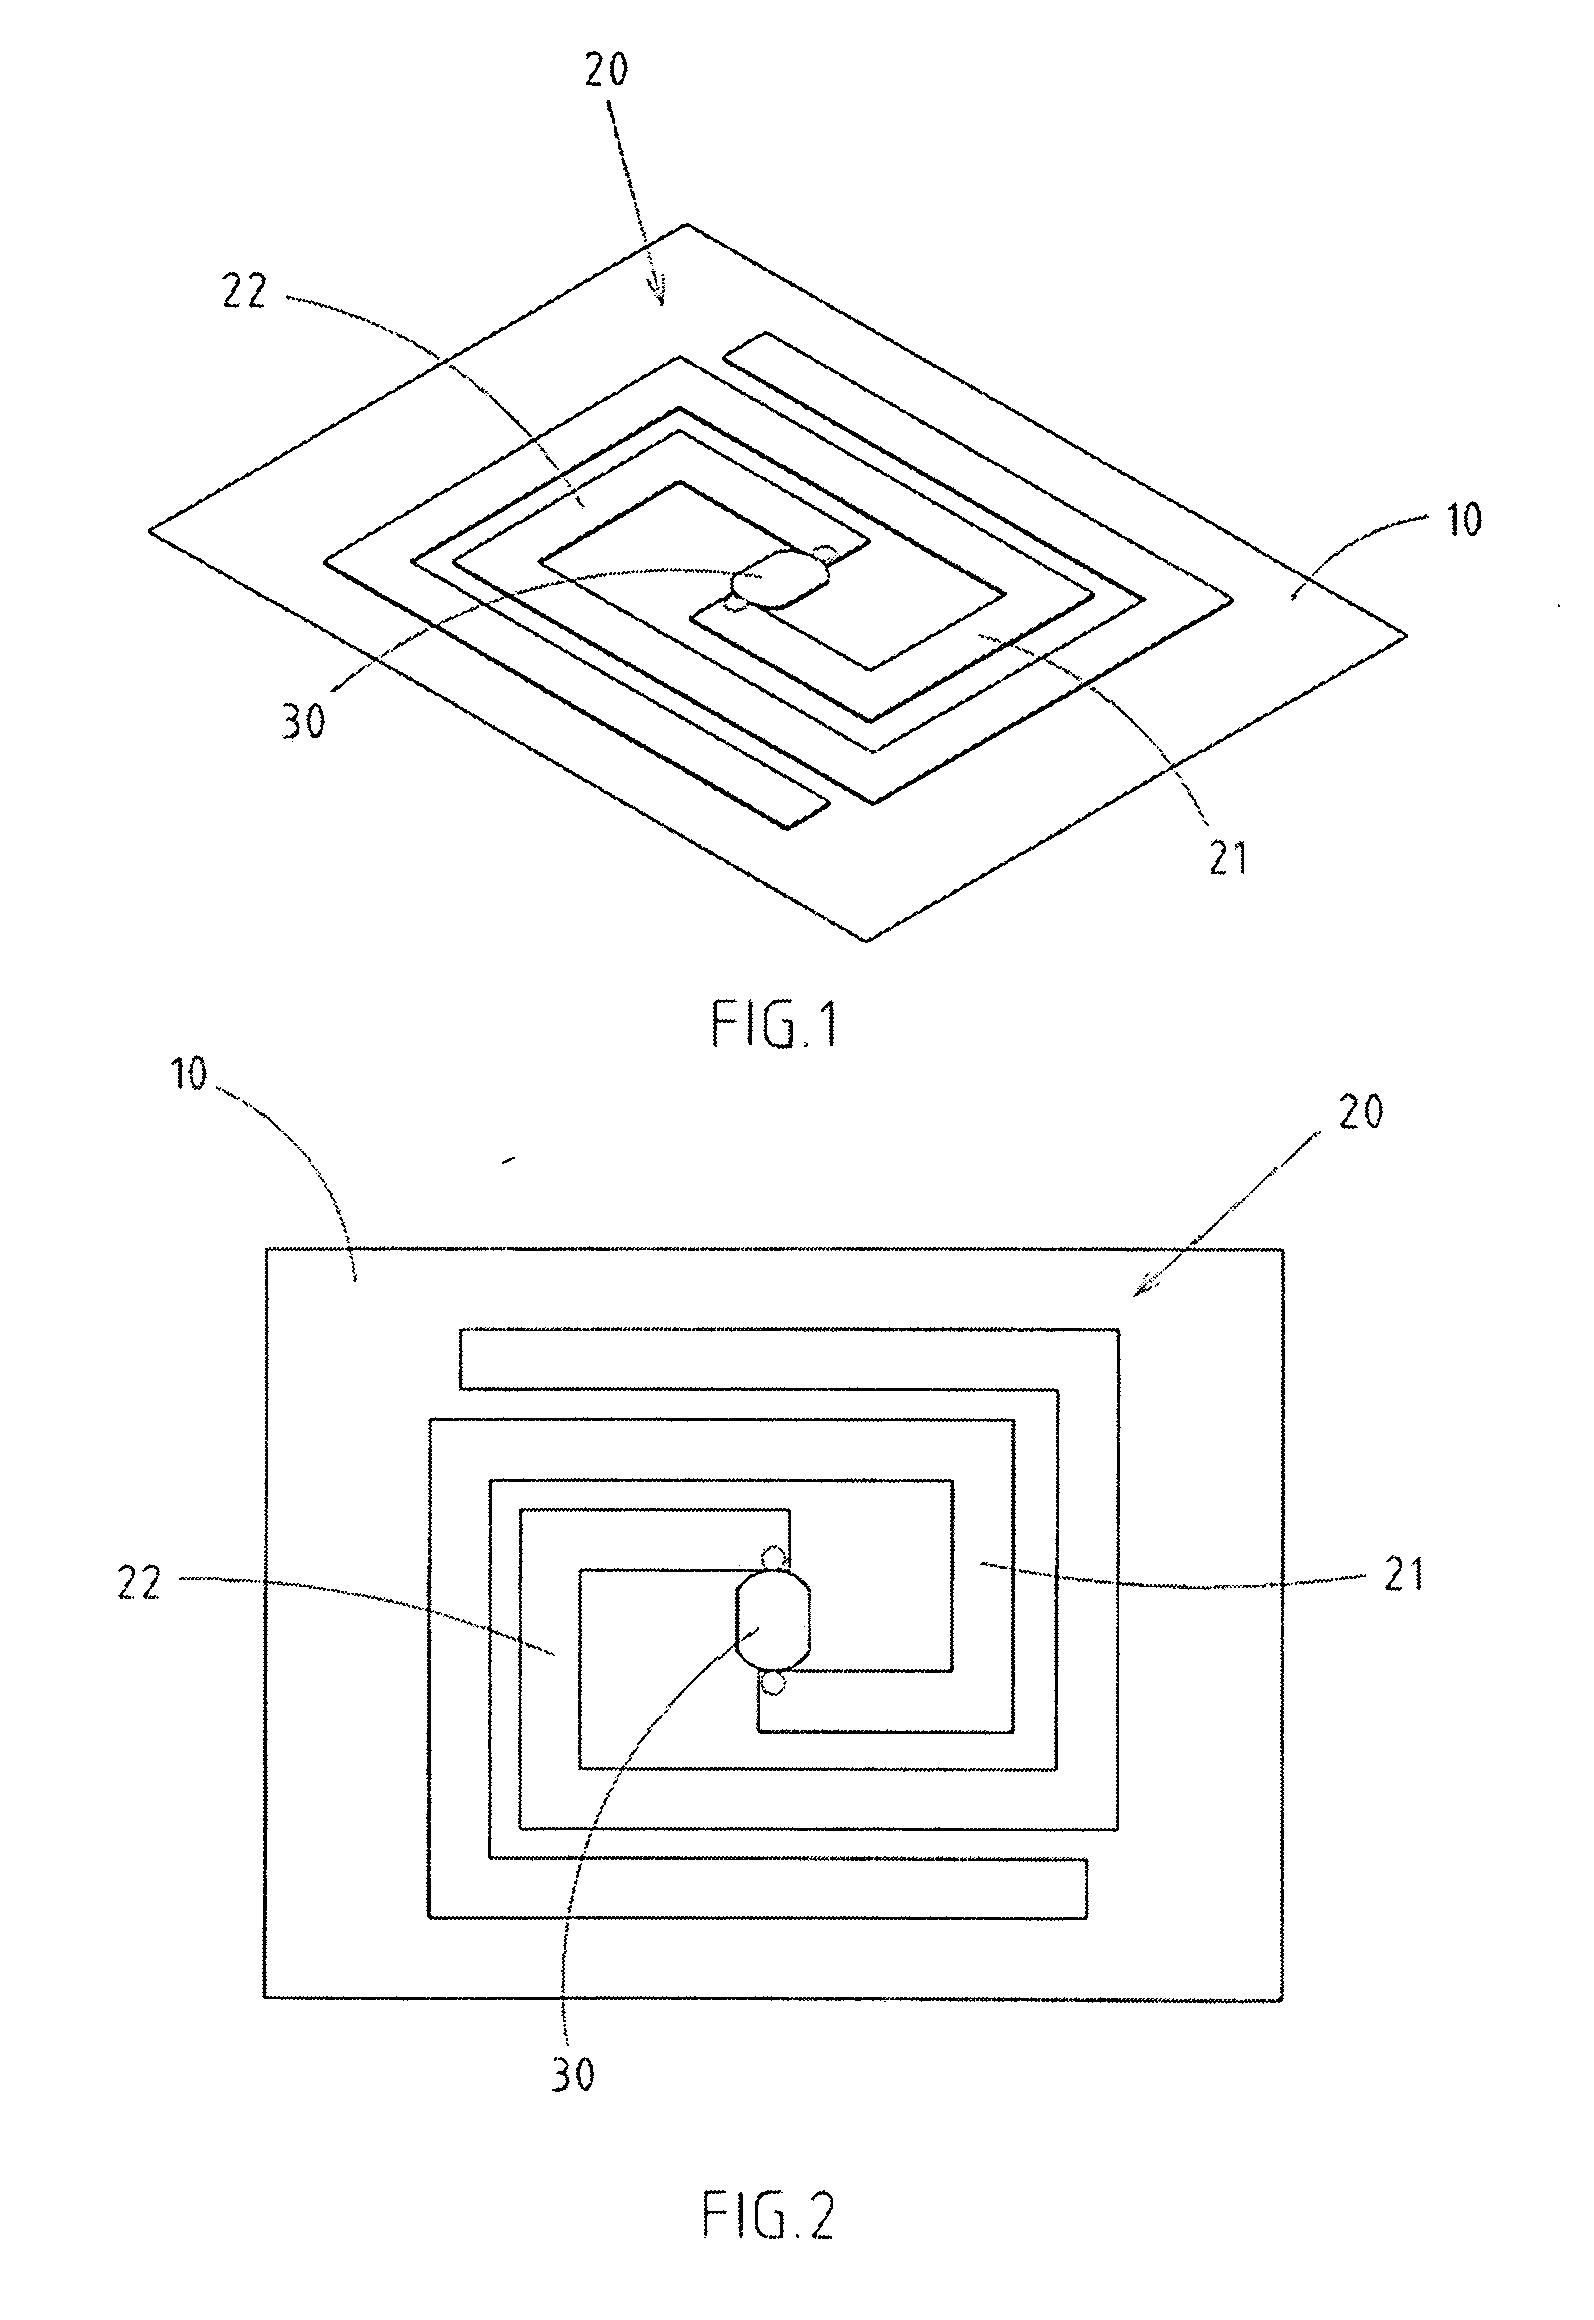 Antenna structure for the radio frequency identification tag